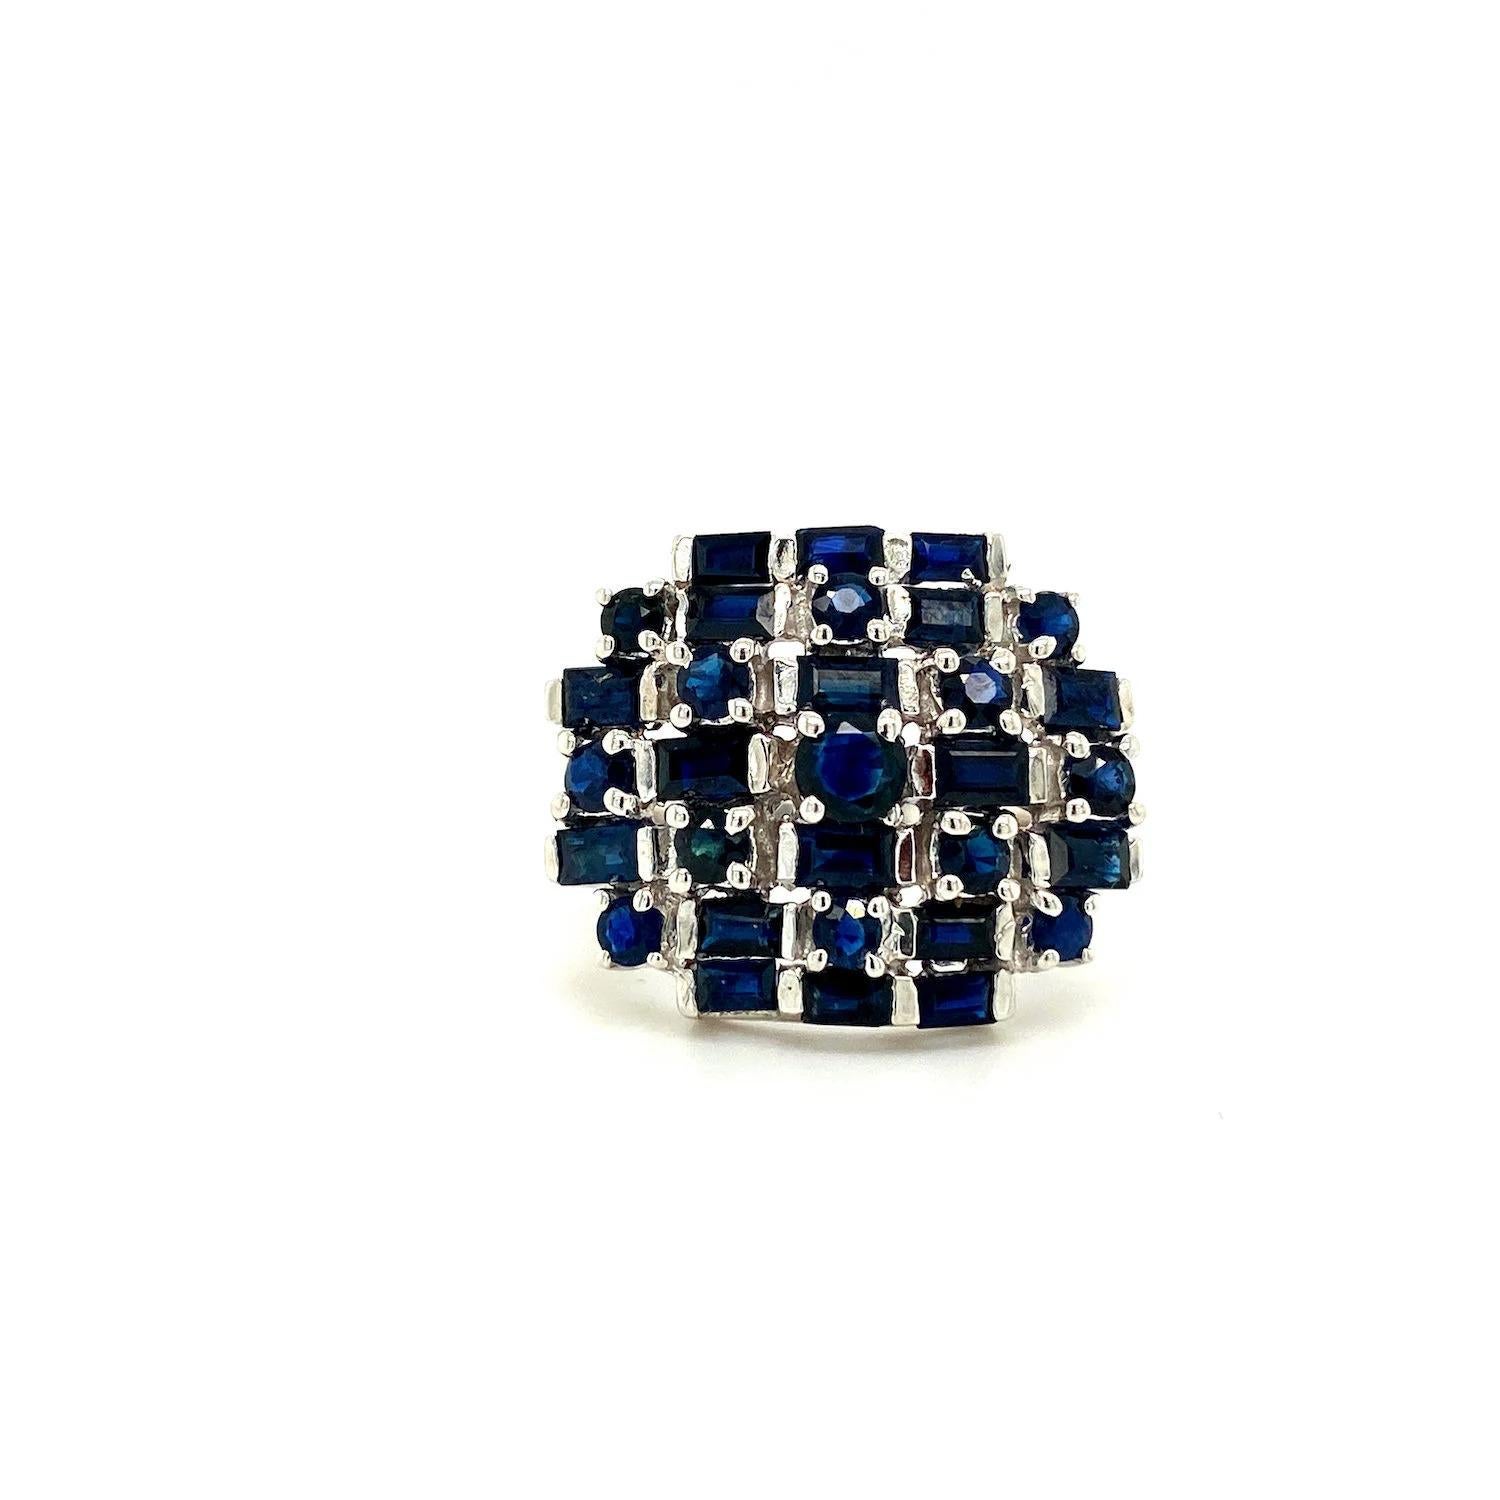 For Sale:  Statement 3.41 ct Blue Sapphire Cluster Bombe Ring 925 Sterling Silver 4